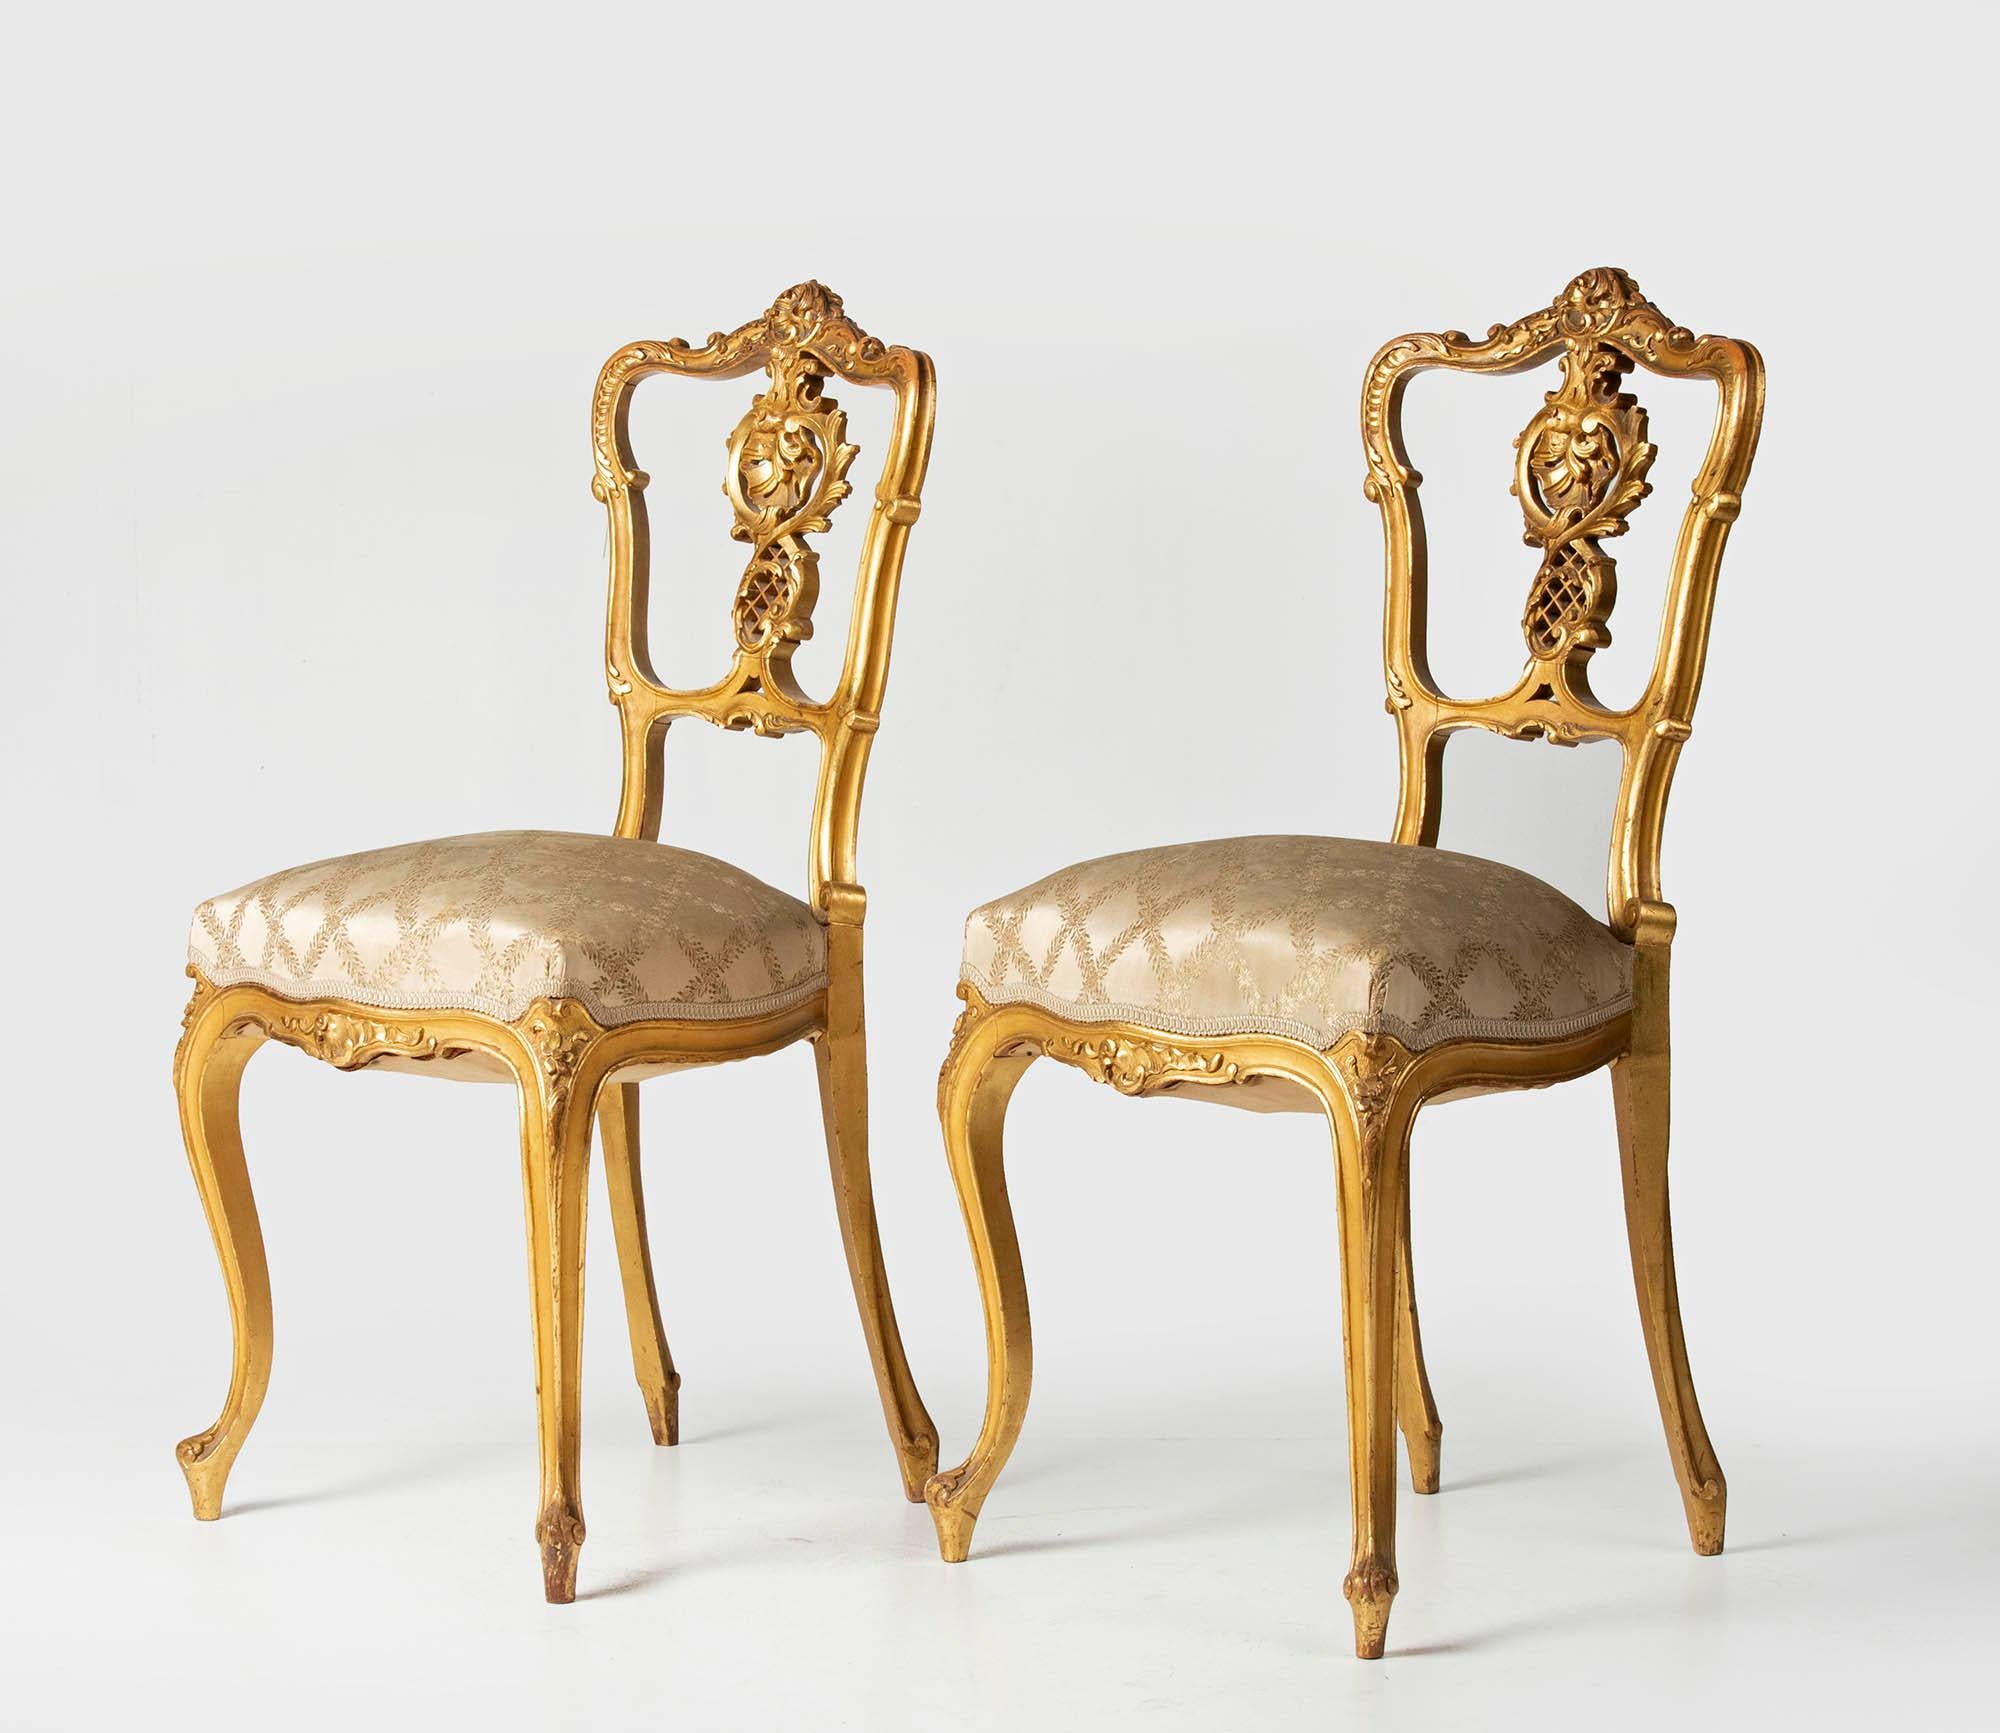 Hand-Carved Pair of 19th Century Louis XV Style French Gold-Leaf Gilded Chairs